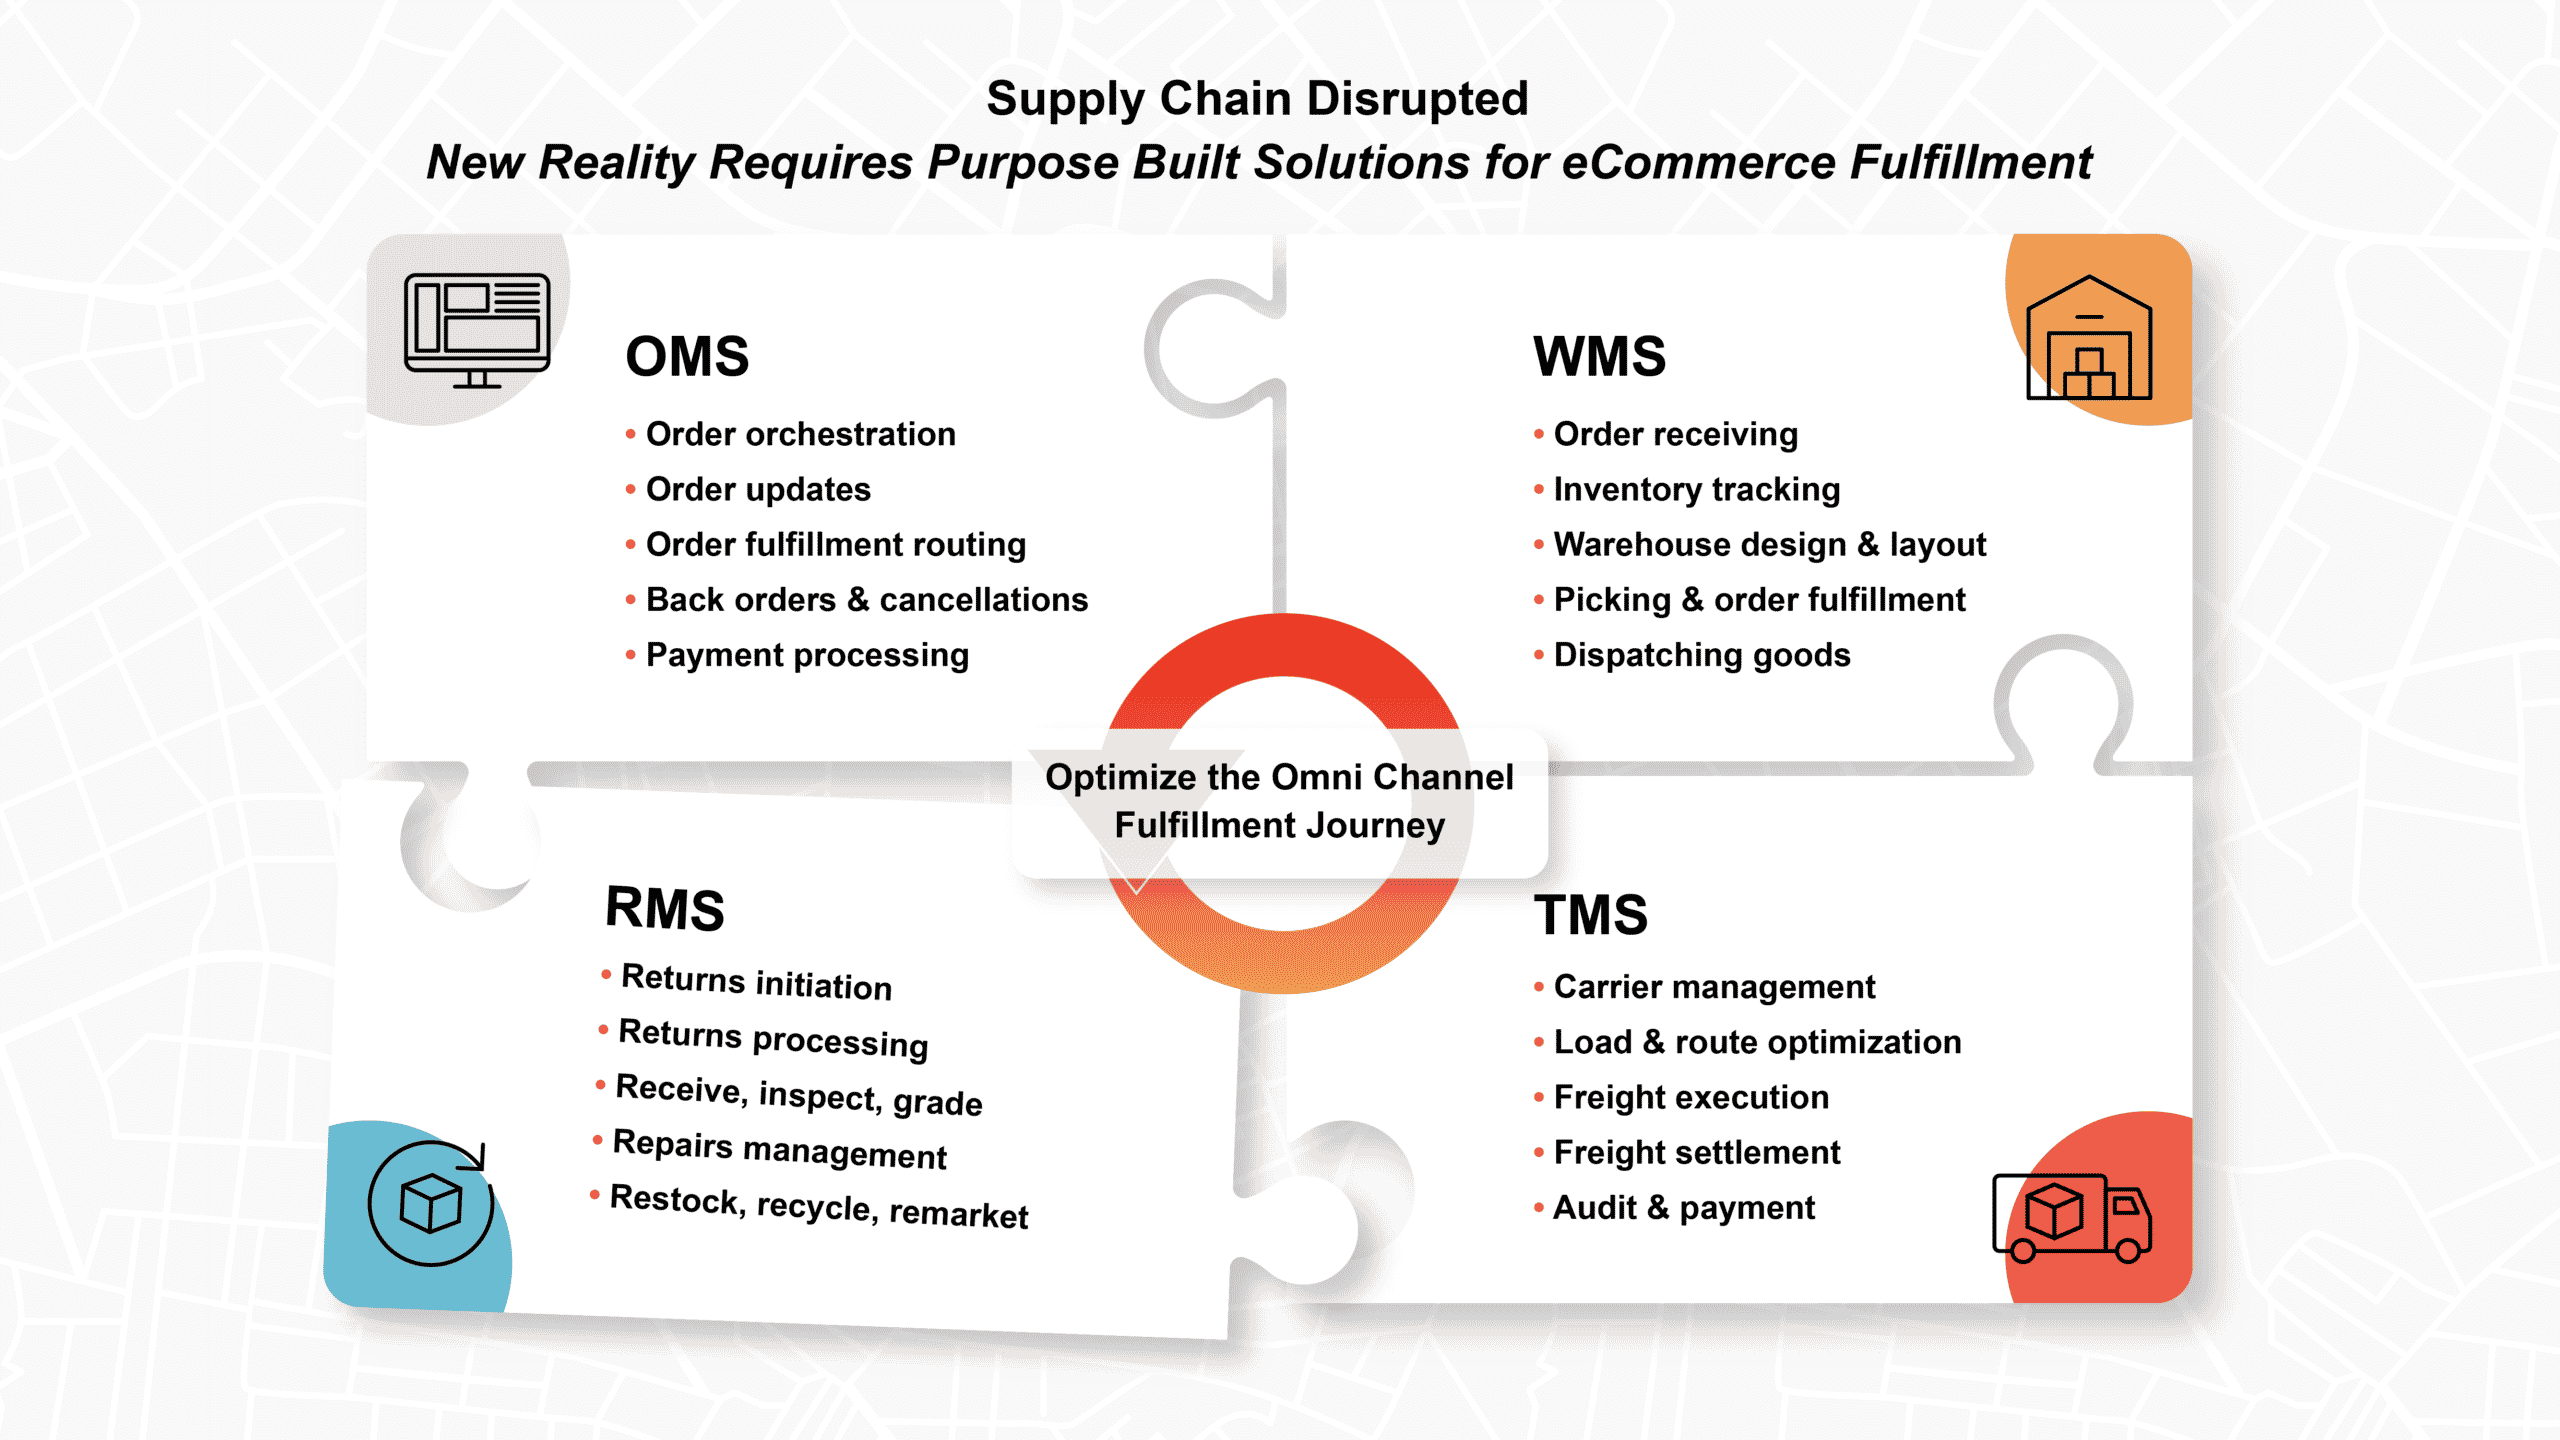 How an RMS fits into the supply chain puzzle